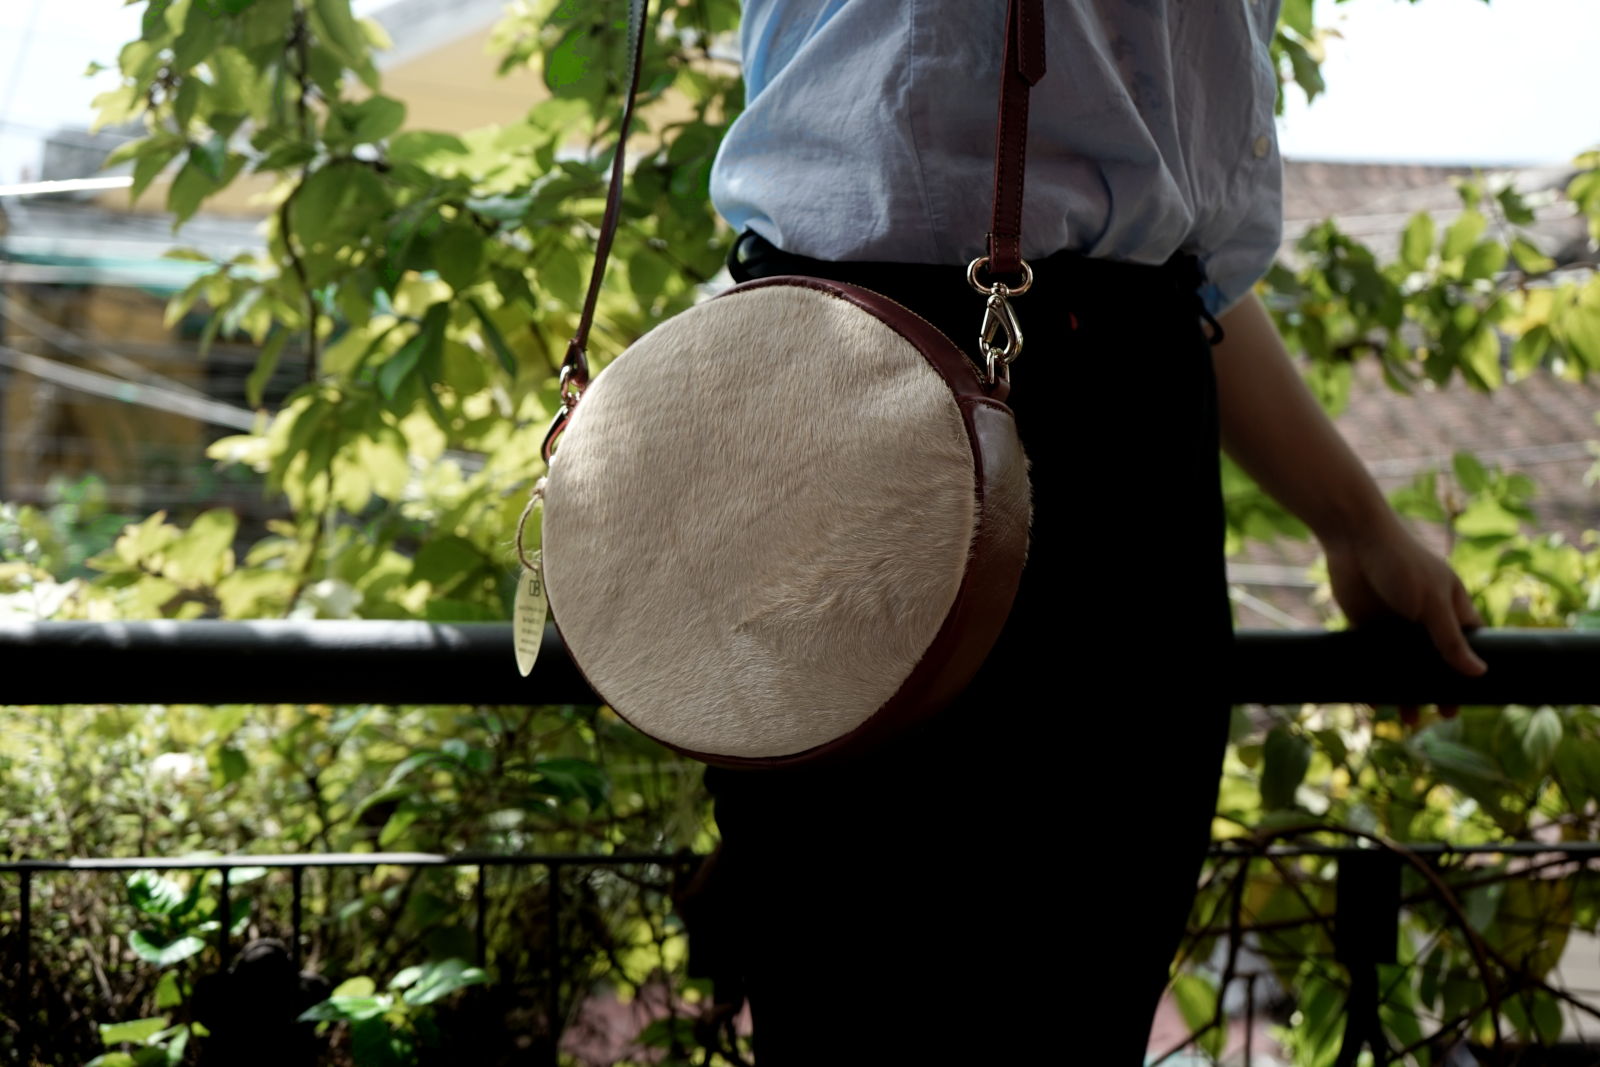 Hoi An Real Leather - Da Bao Real Leather: Round handbag made of cow lether, covered in fur. The sides are made of leather. Many colors available